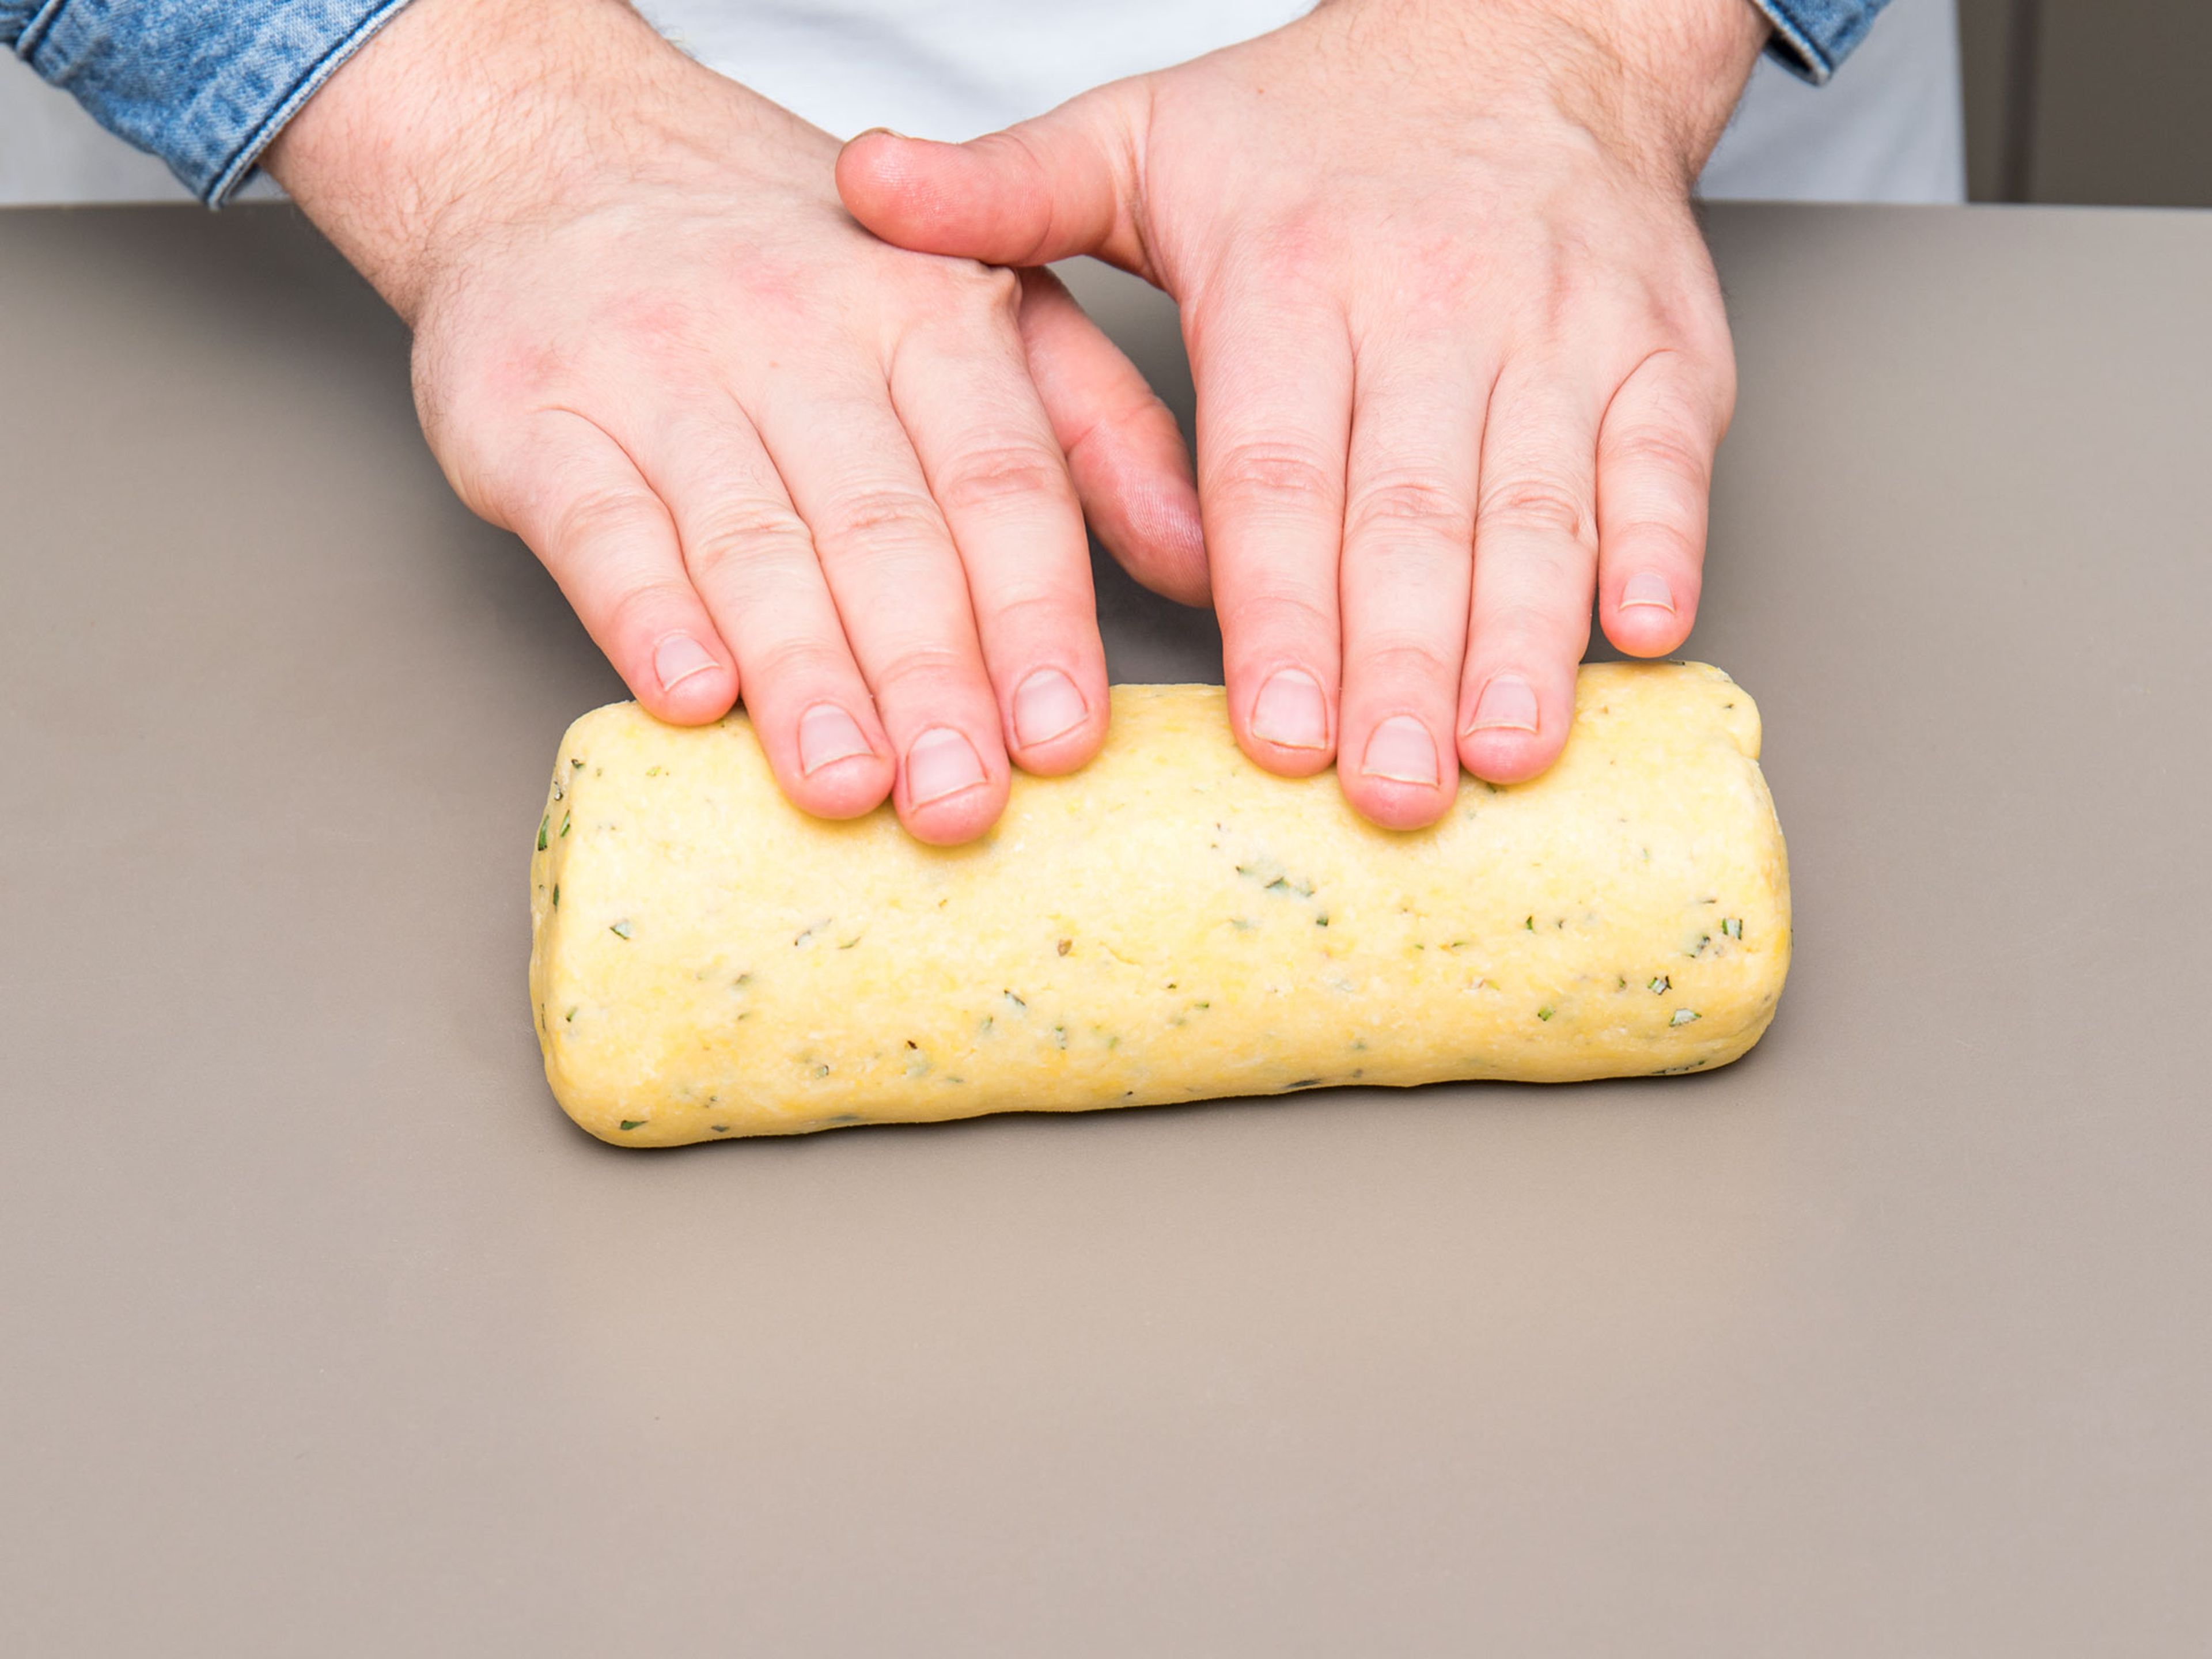 Knead the dough on medium speed for approx. 2 – 3 min. until a crumbly dough forms. Turn dough out on a floured work surface, knead a bit, and form into a roll (5cm/2in.). Form into a log, wrap dough in plastic wrap, and refrigerate for approx. 60 min.